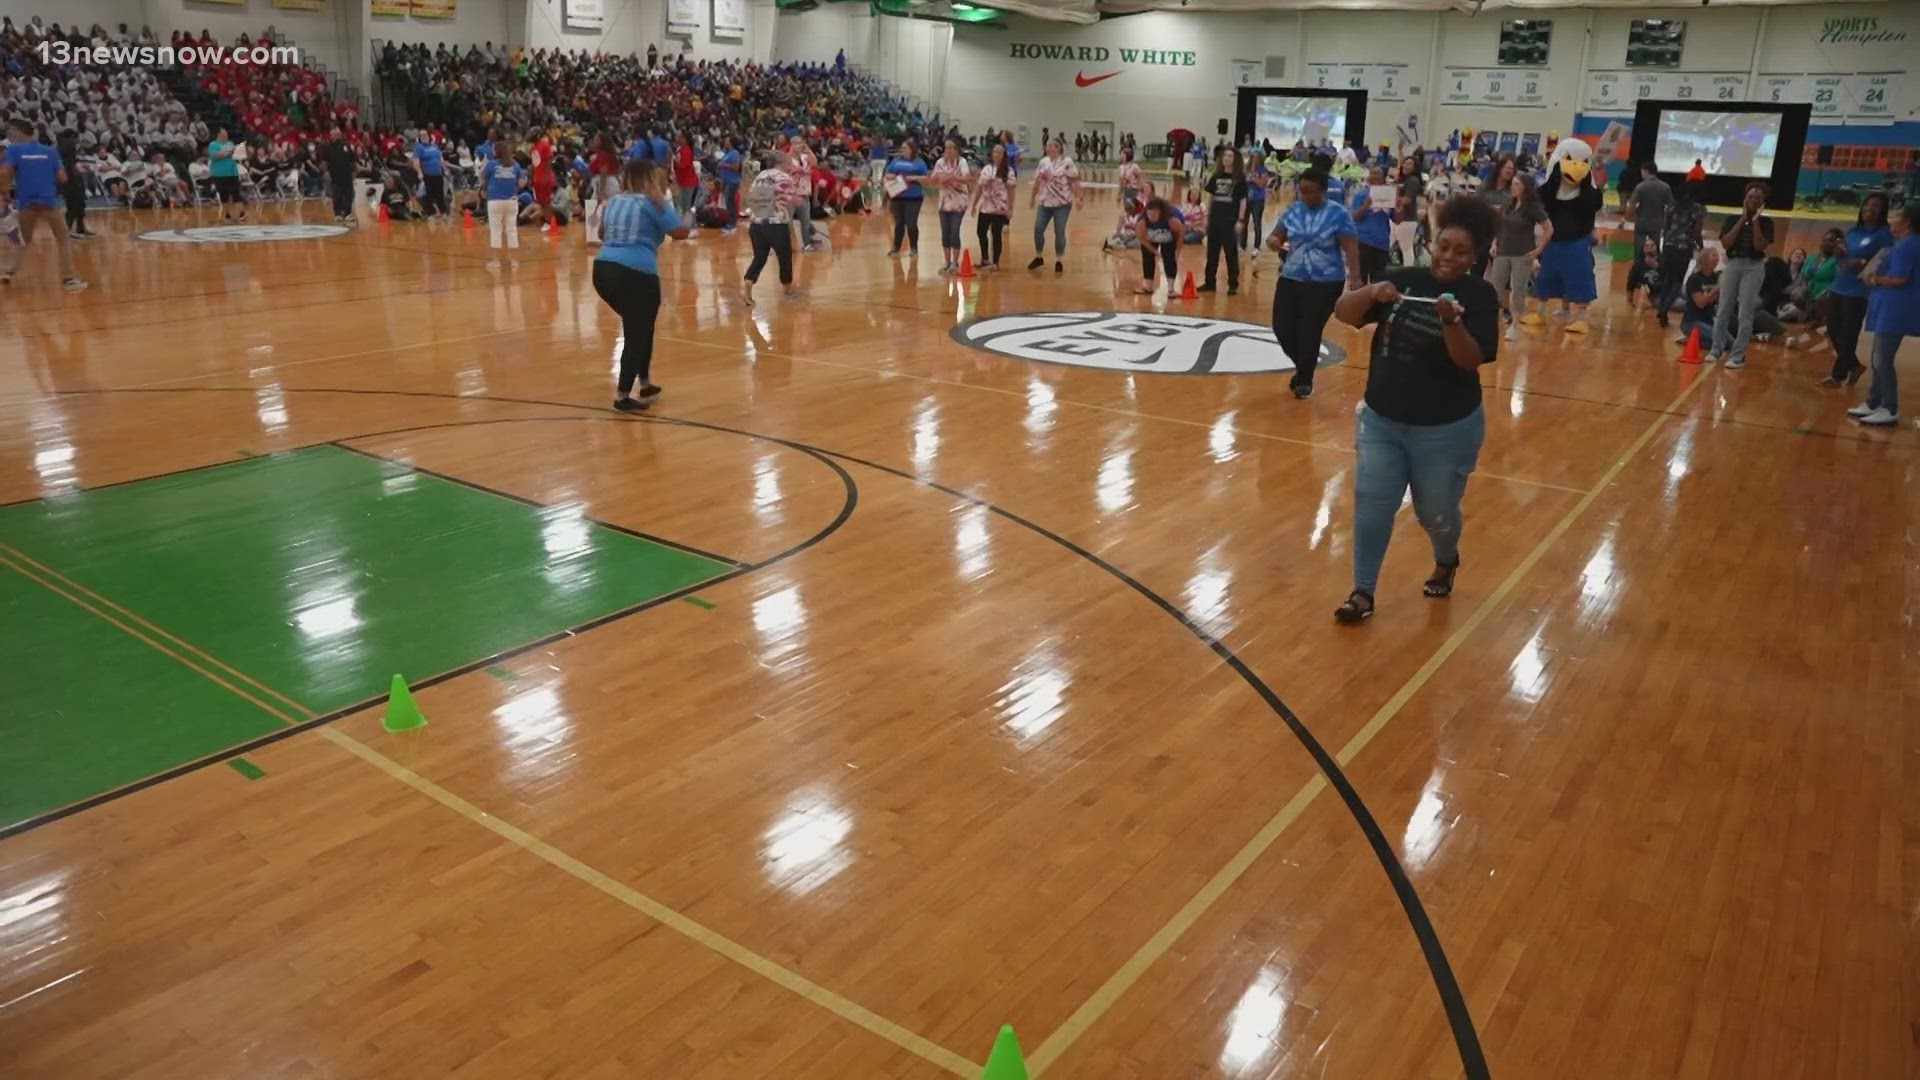 The kick-off featured division-wide and staff celebrations with pep rally cheers and games.